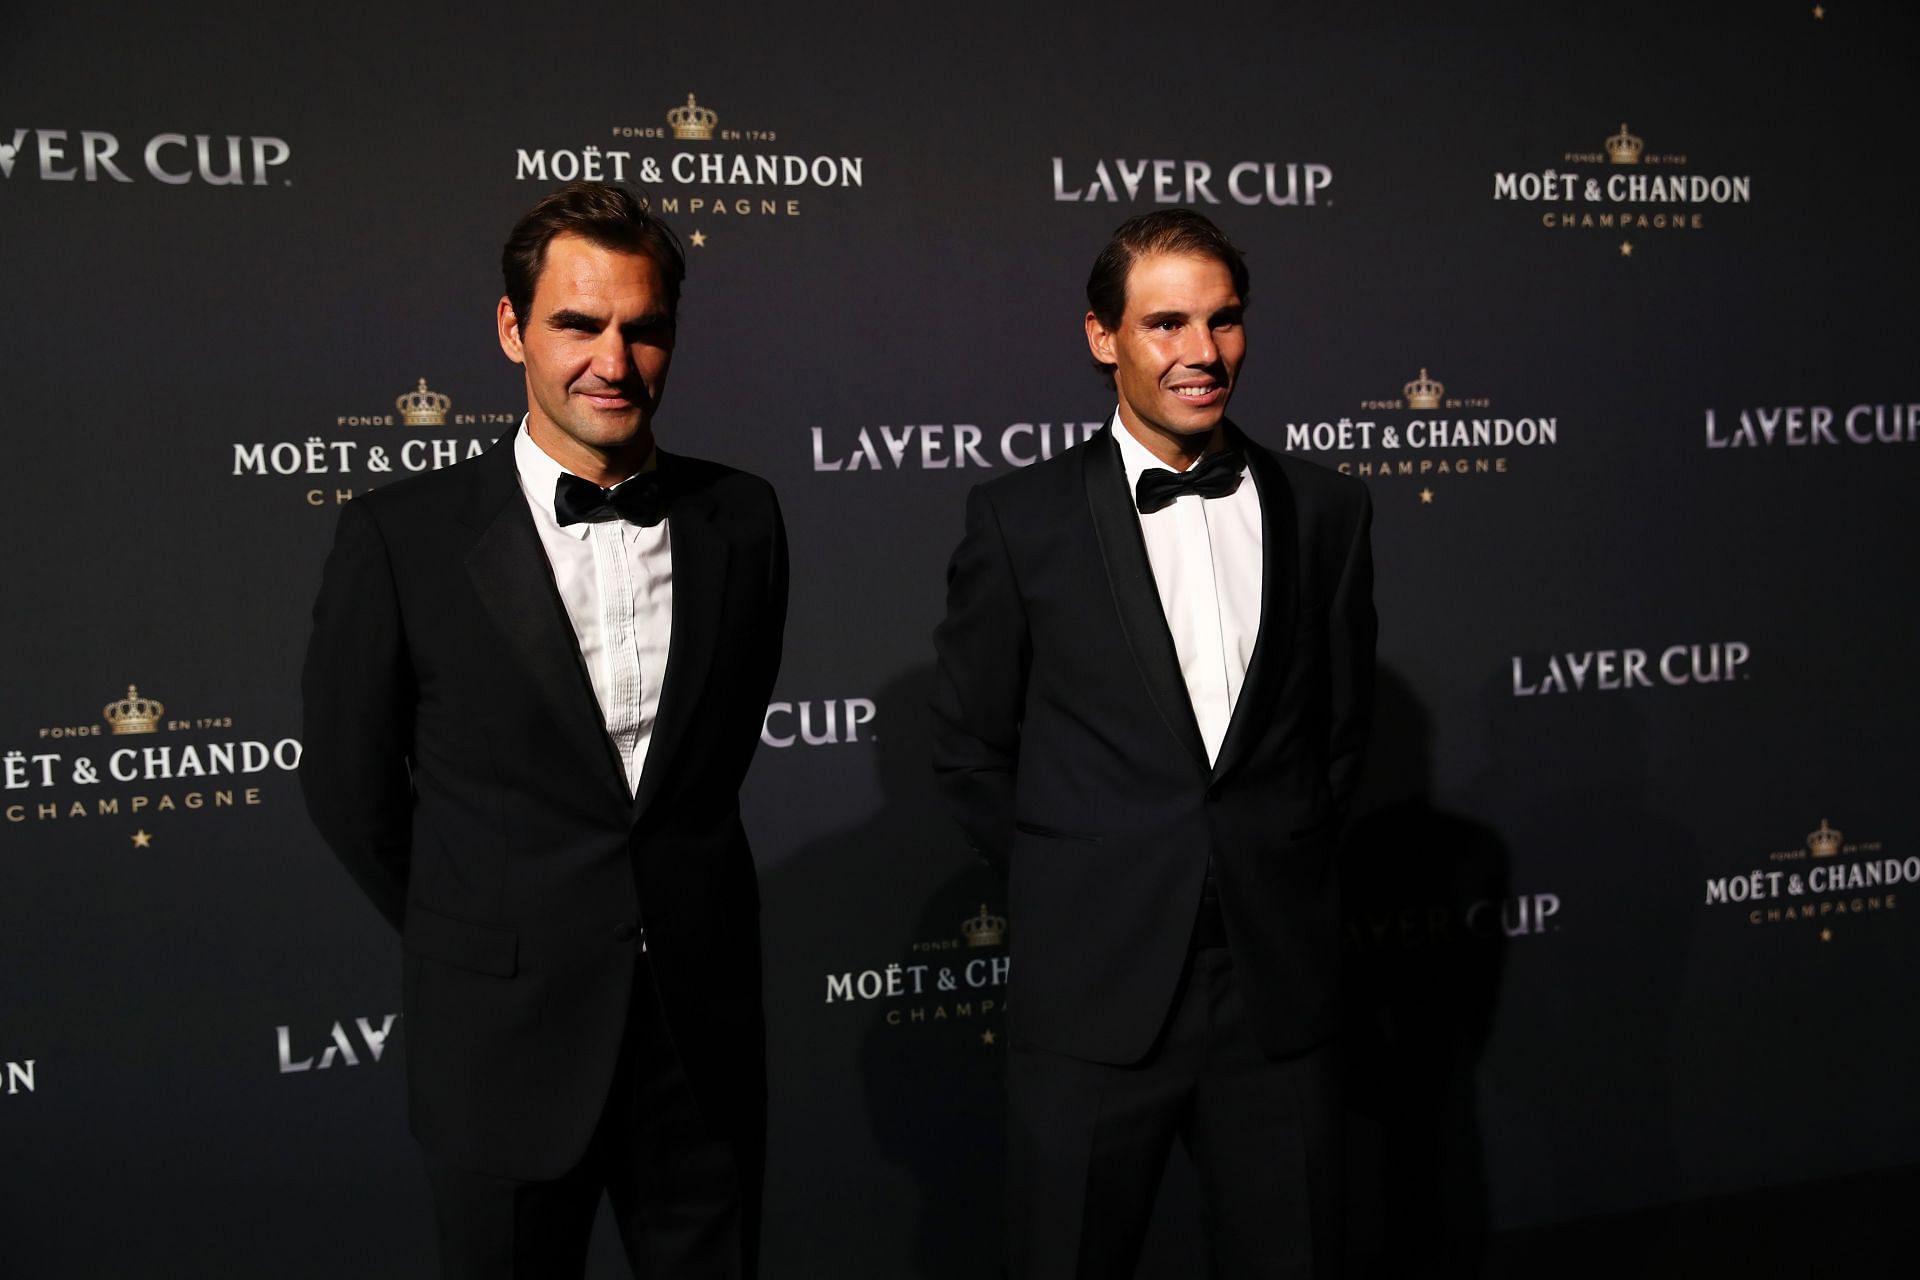 Pete Wentz recently described the playing styles of Federer [left] and Nadal